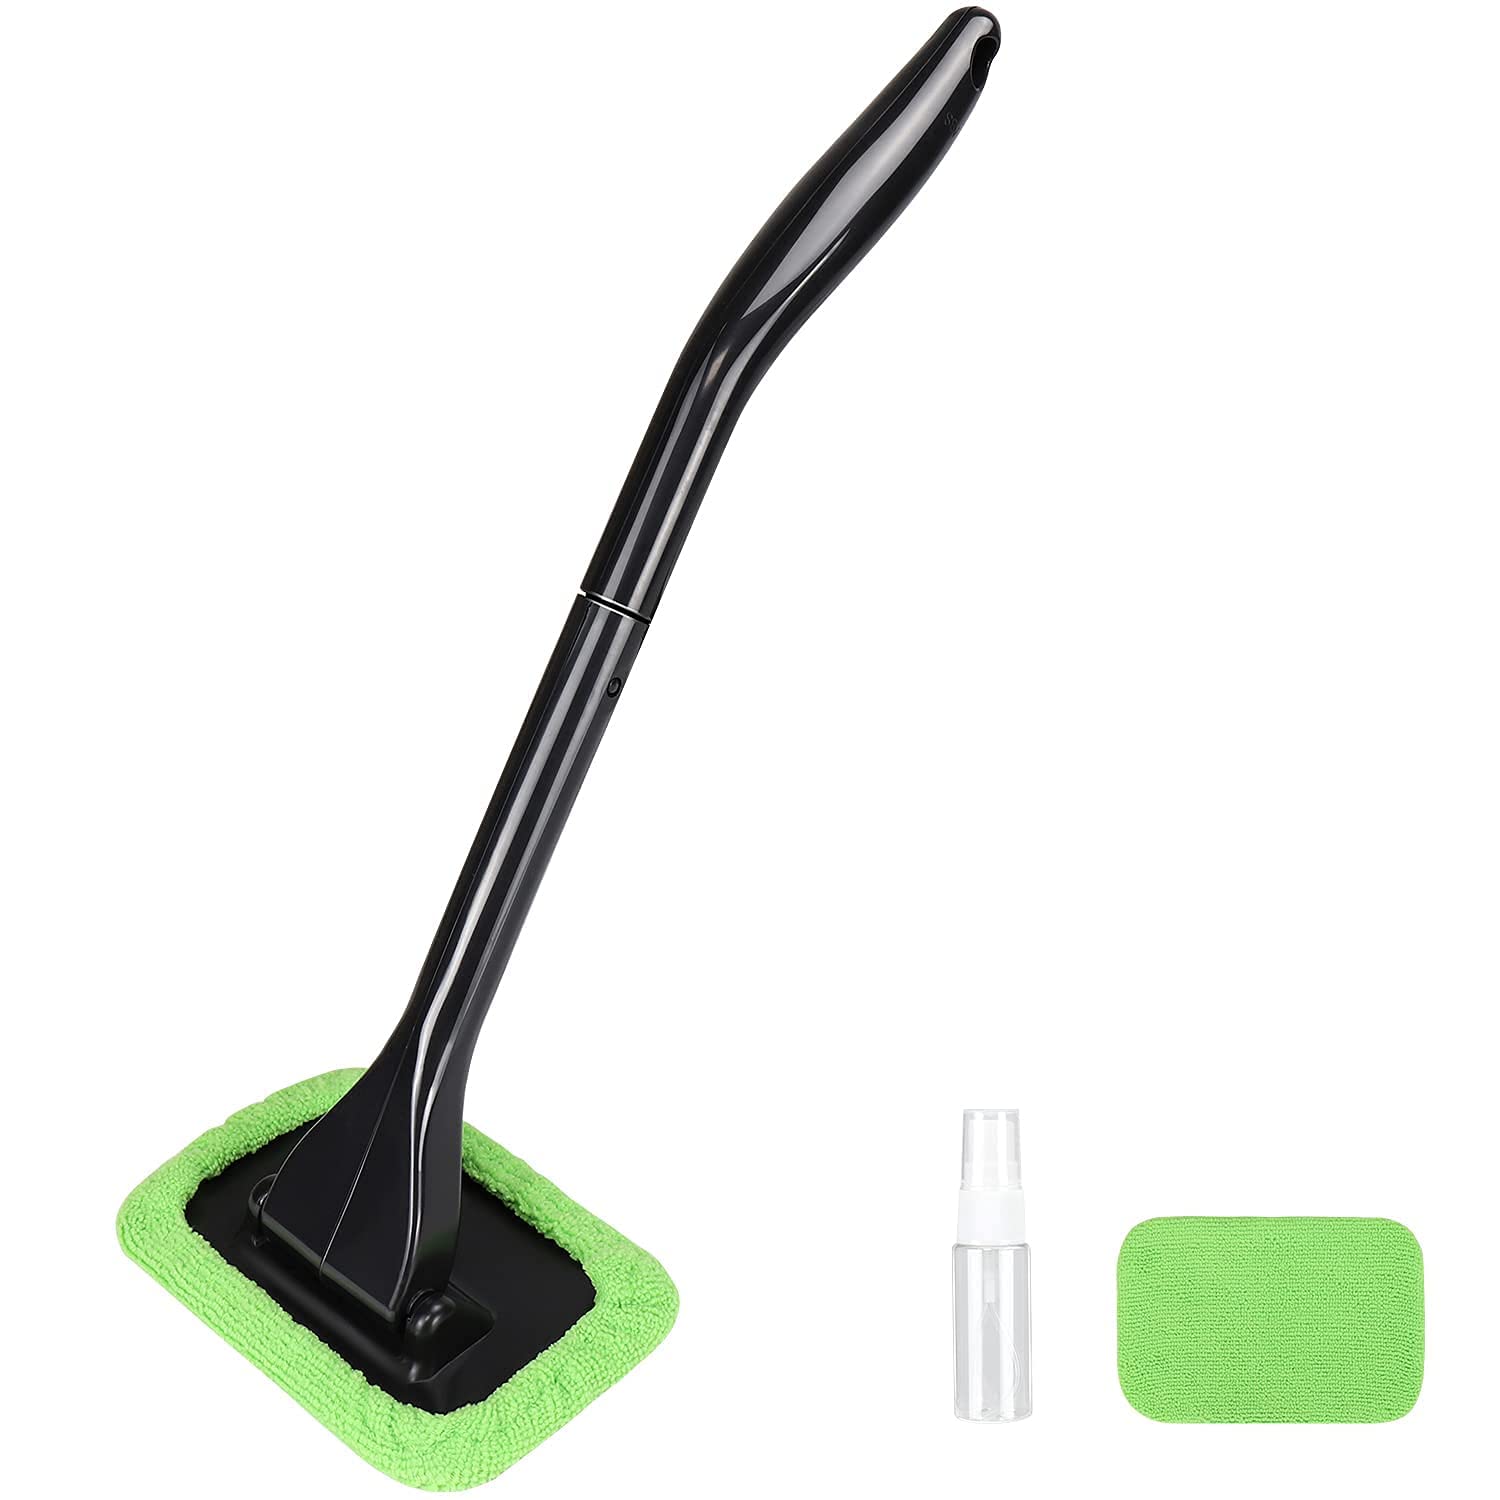 BEST WINDOW CLEANING TOOL FOR INSIDE YOUR